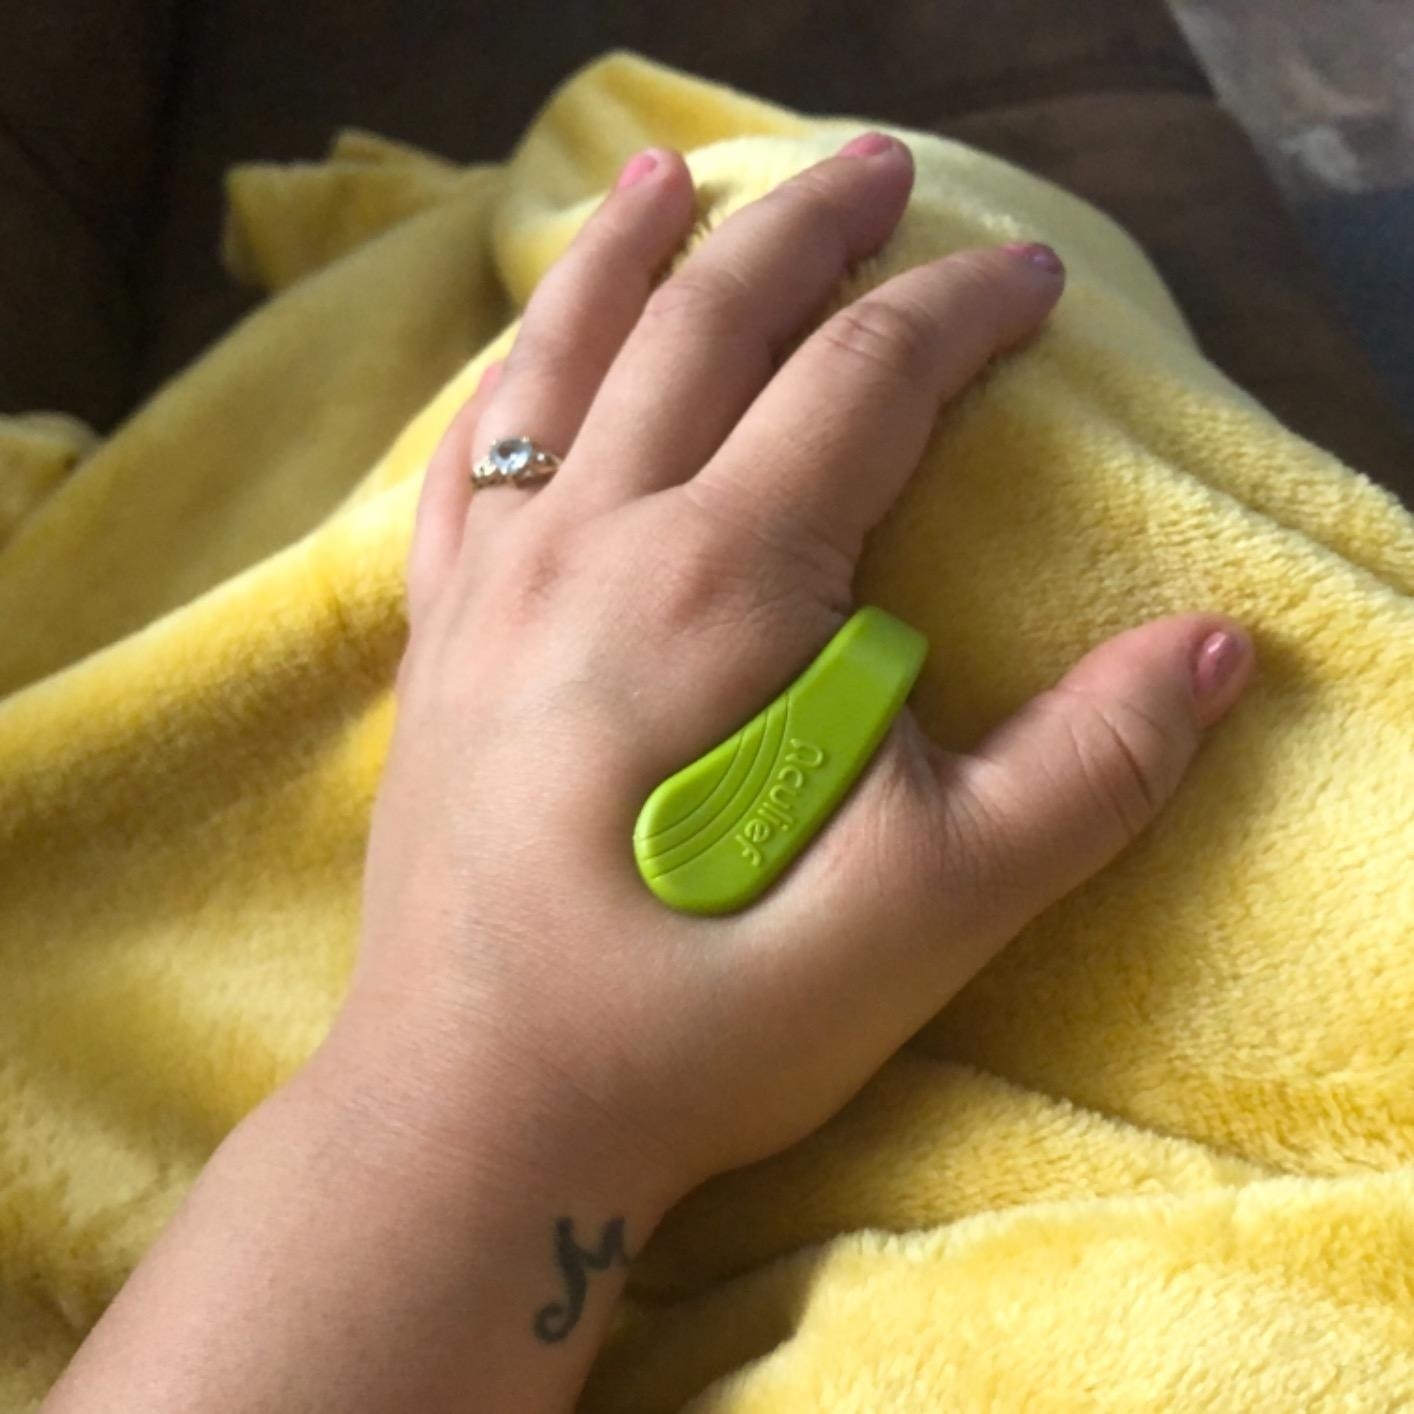 Reviewer&#x27;s hand with the U-shaped device clipped on